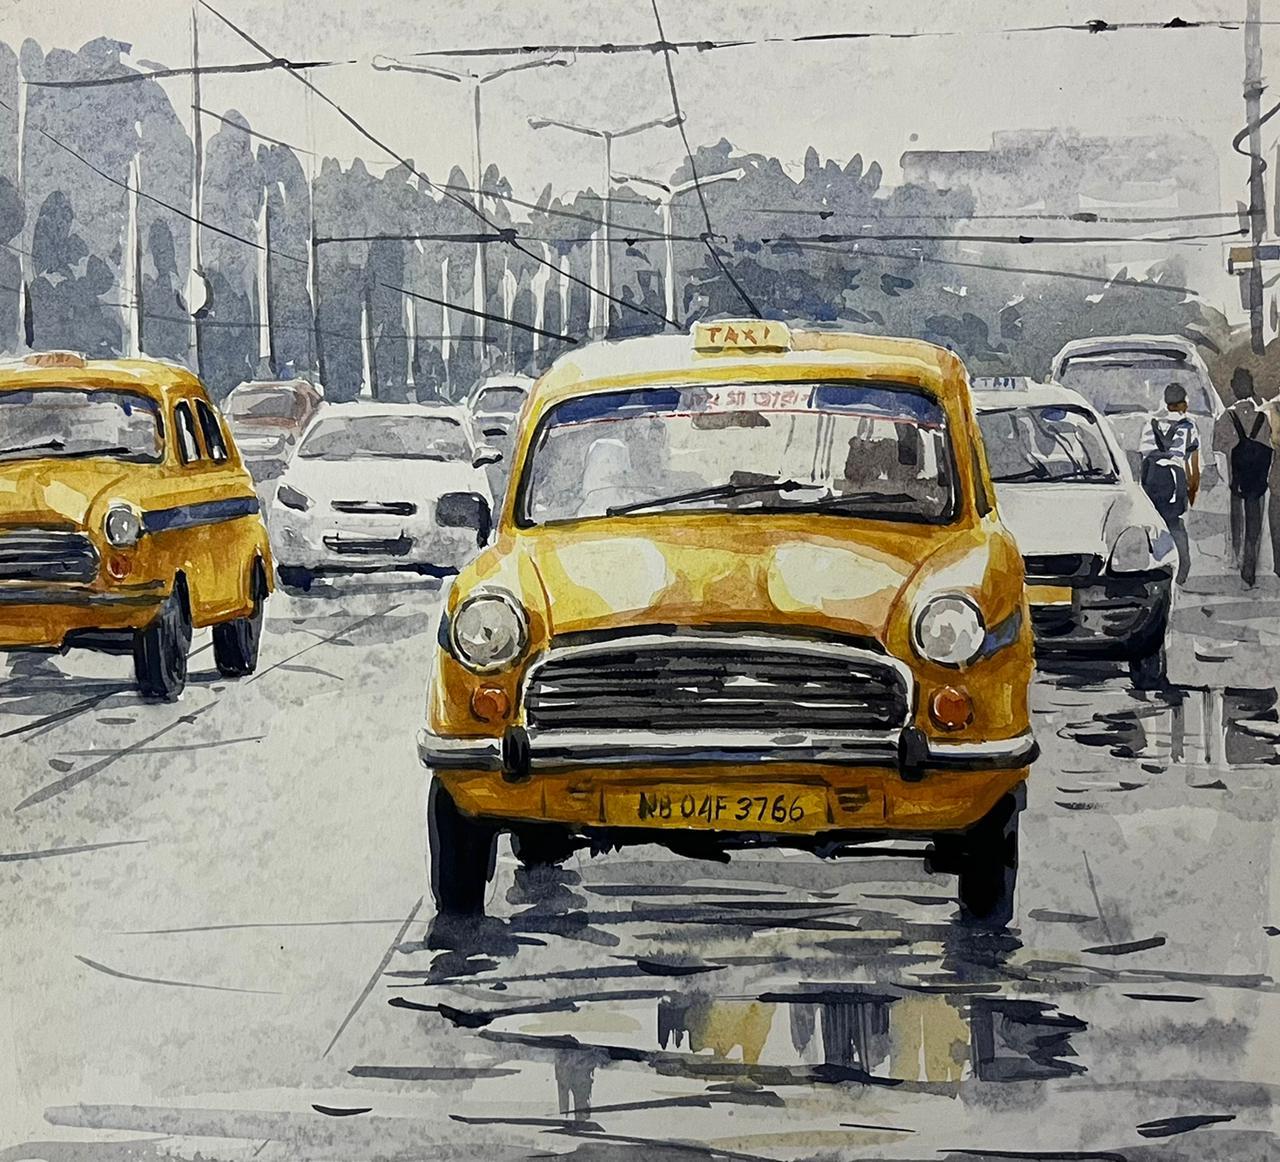 Kolkata city, (Set Of 4) Watercolour on Paper by Contemporary Artist “In Stock” - Painting by Raju Sarkar